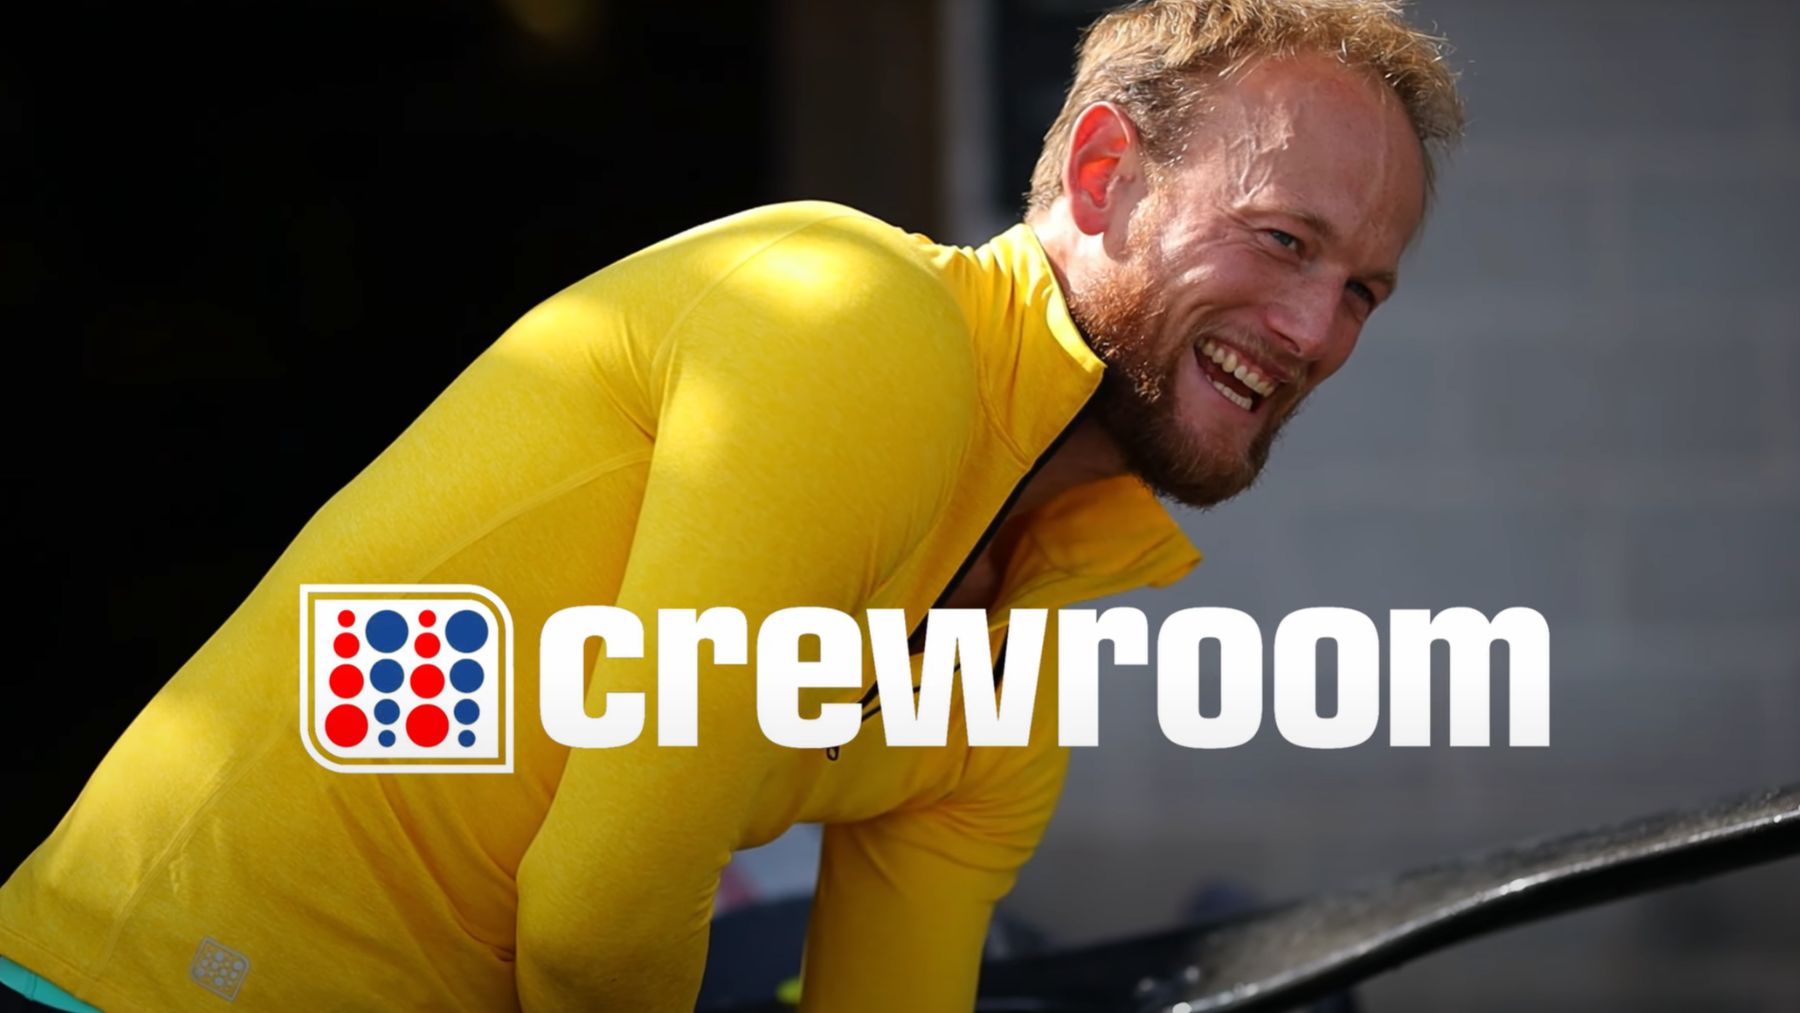 An introduction to Crewroom Clothing.